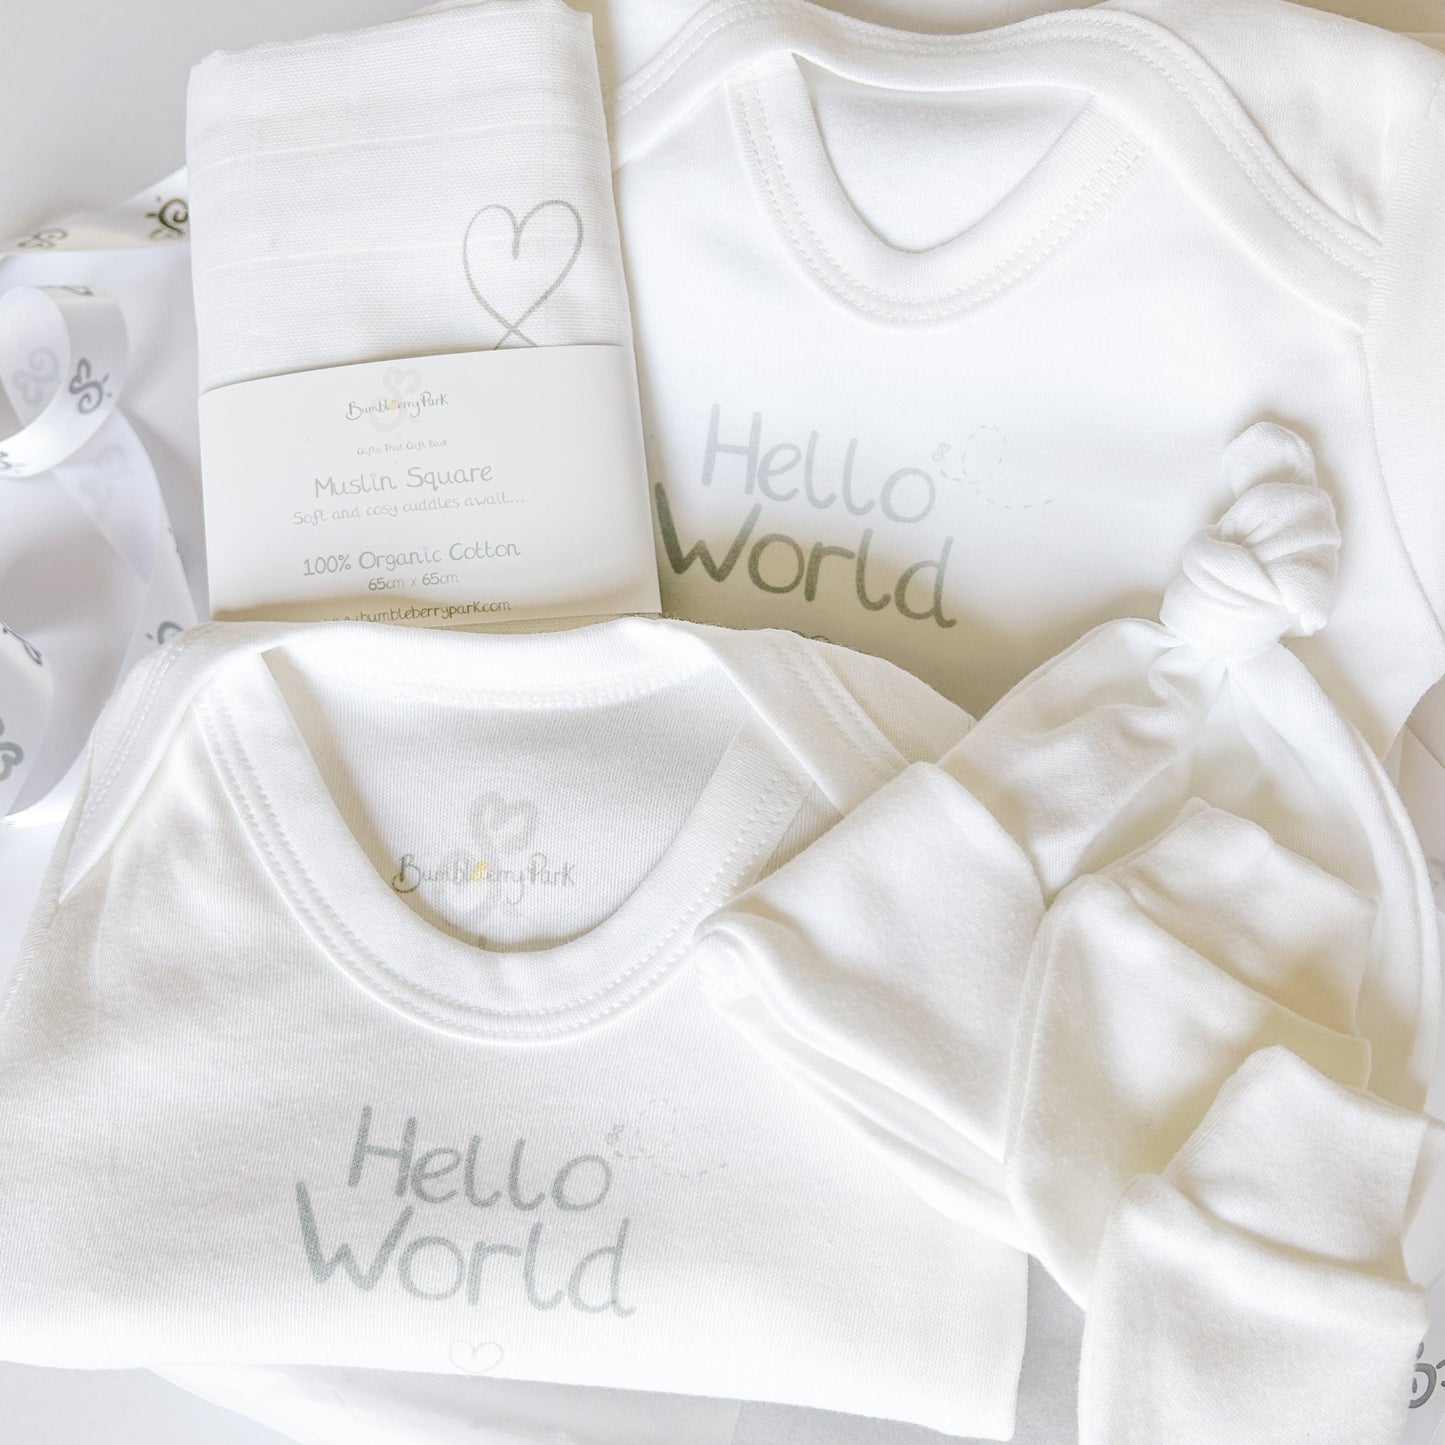 neutral soft grey organic cotton new baby clothing gift set with luxury gift hamper placed inside a white gloss gift box with tiissue paper gift wrapping